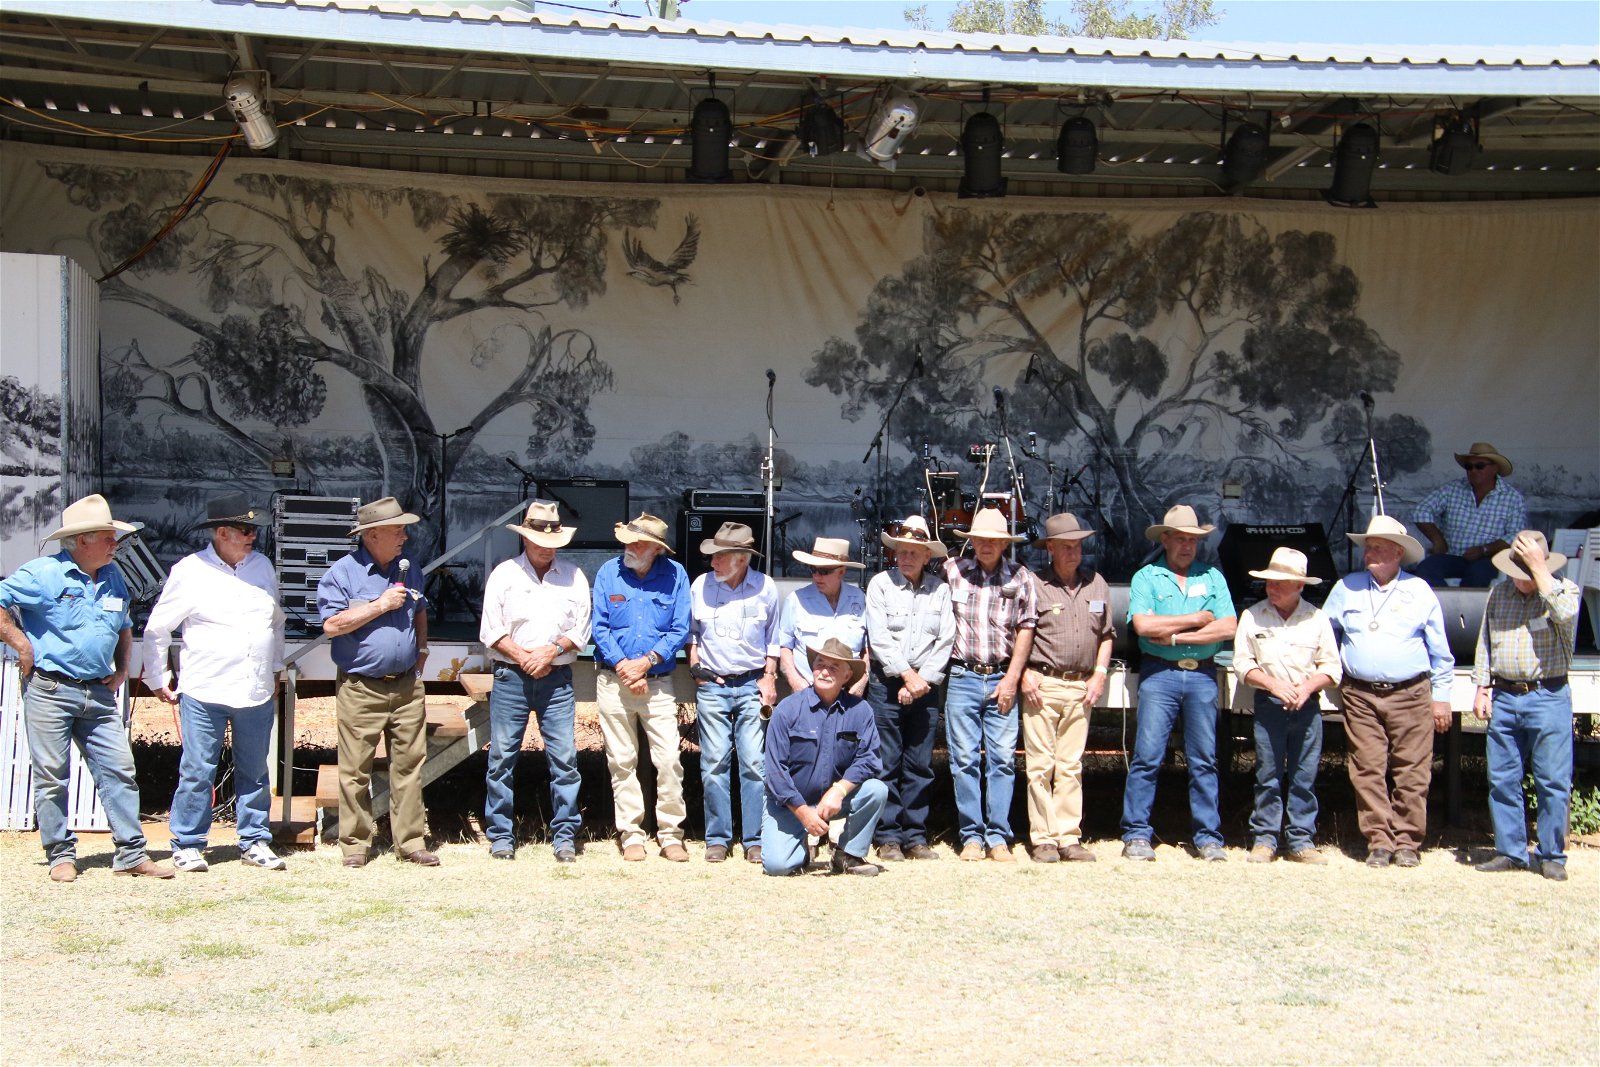 Drover's Camp Festival 2020 Postponed due to COVID-19 Camooweal